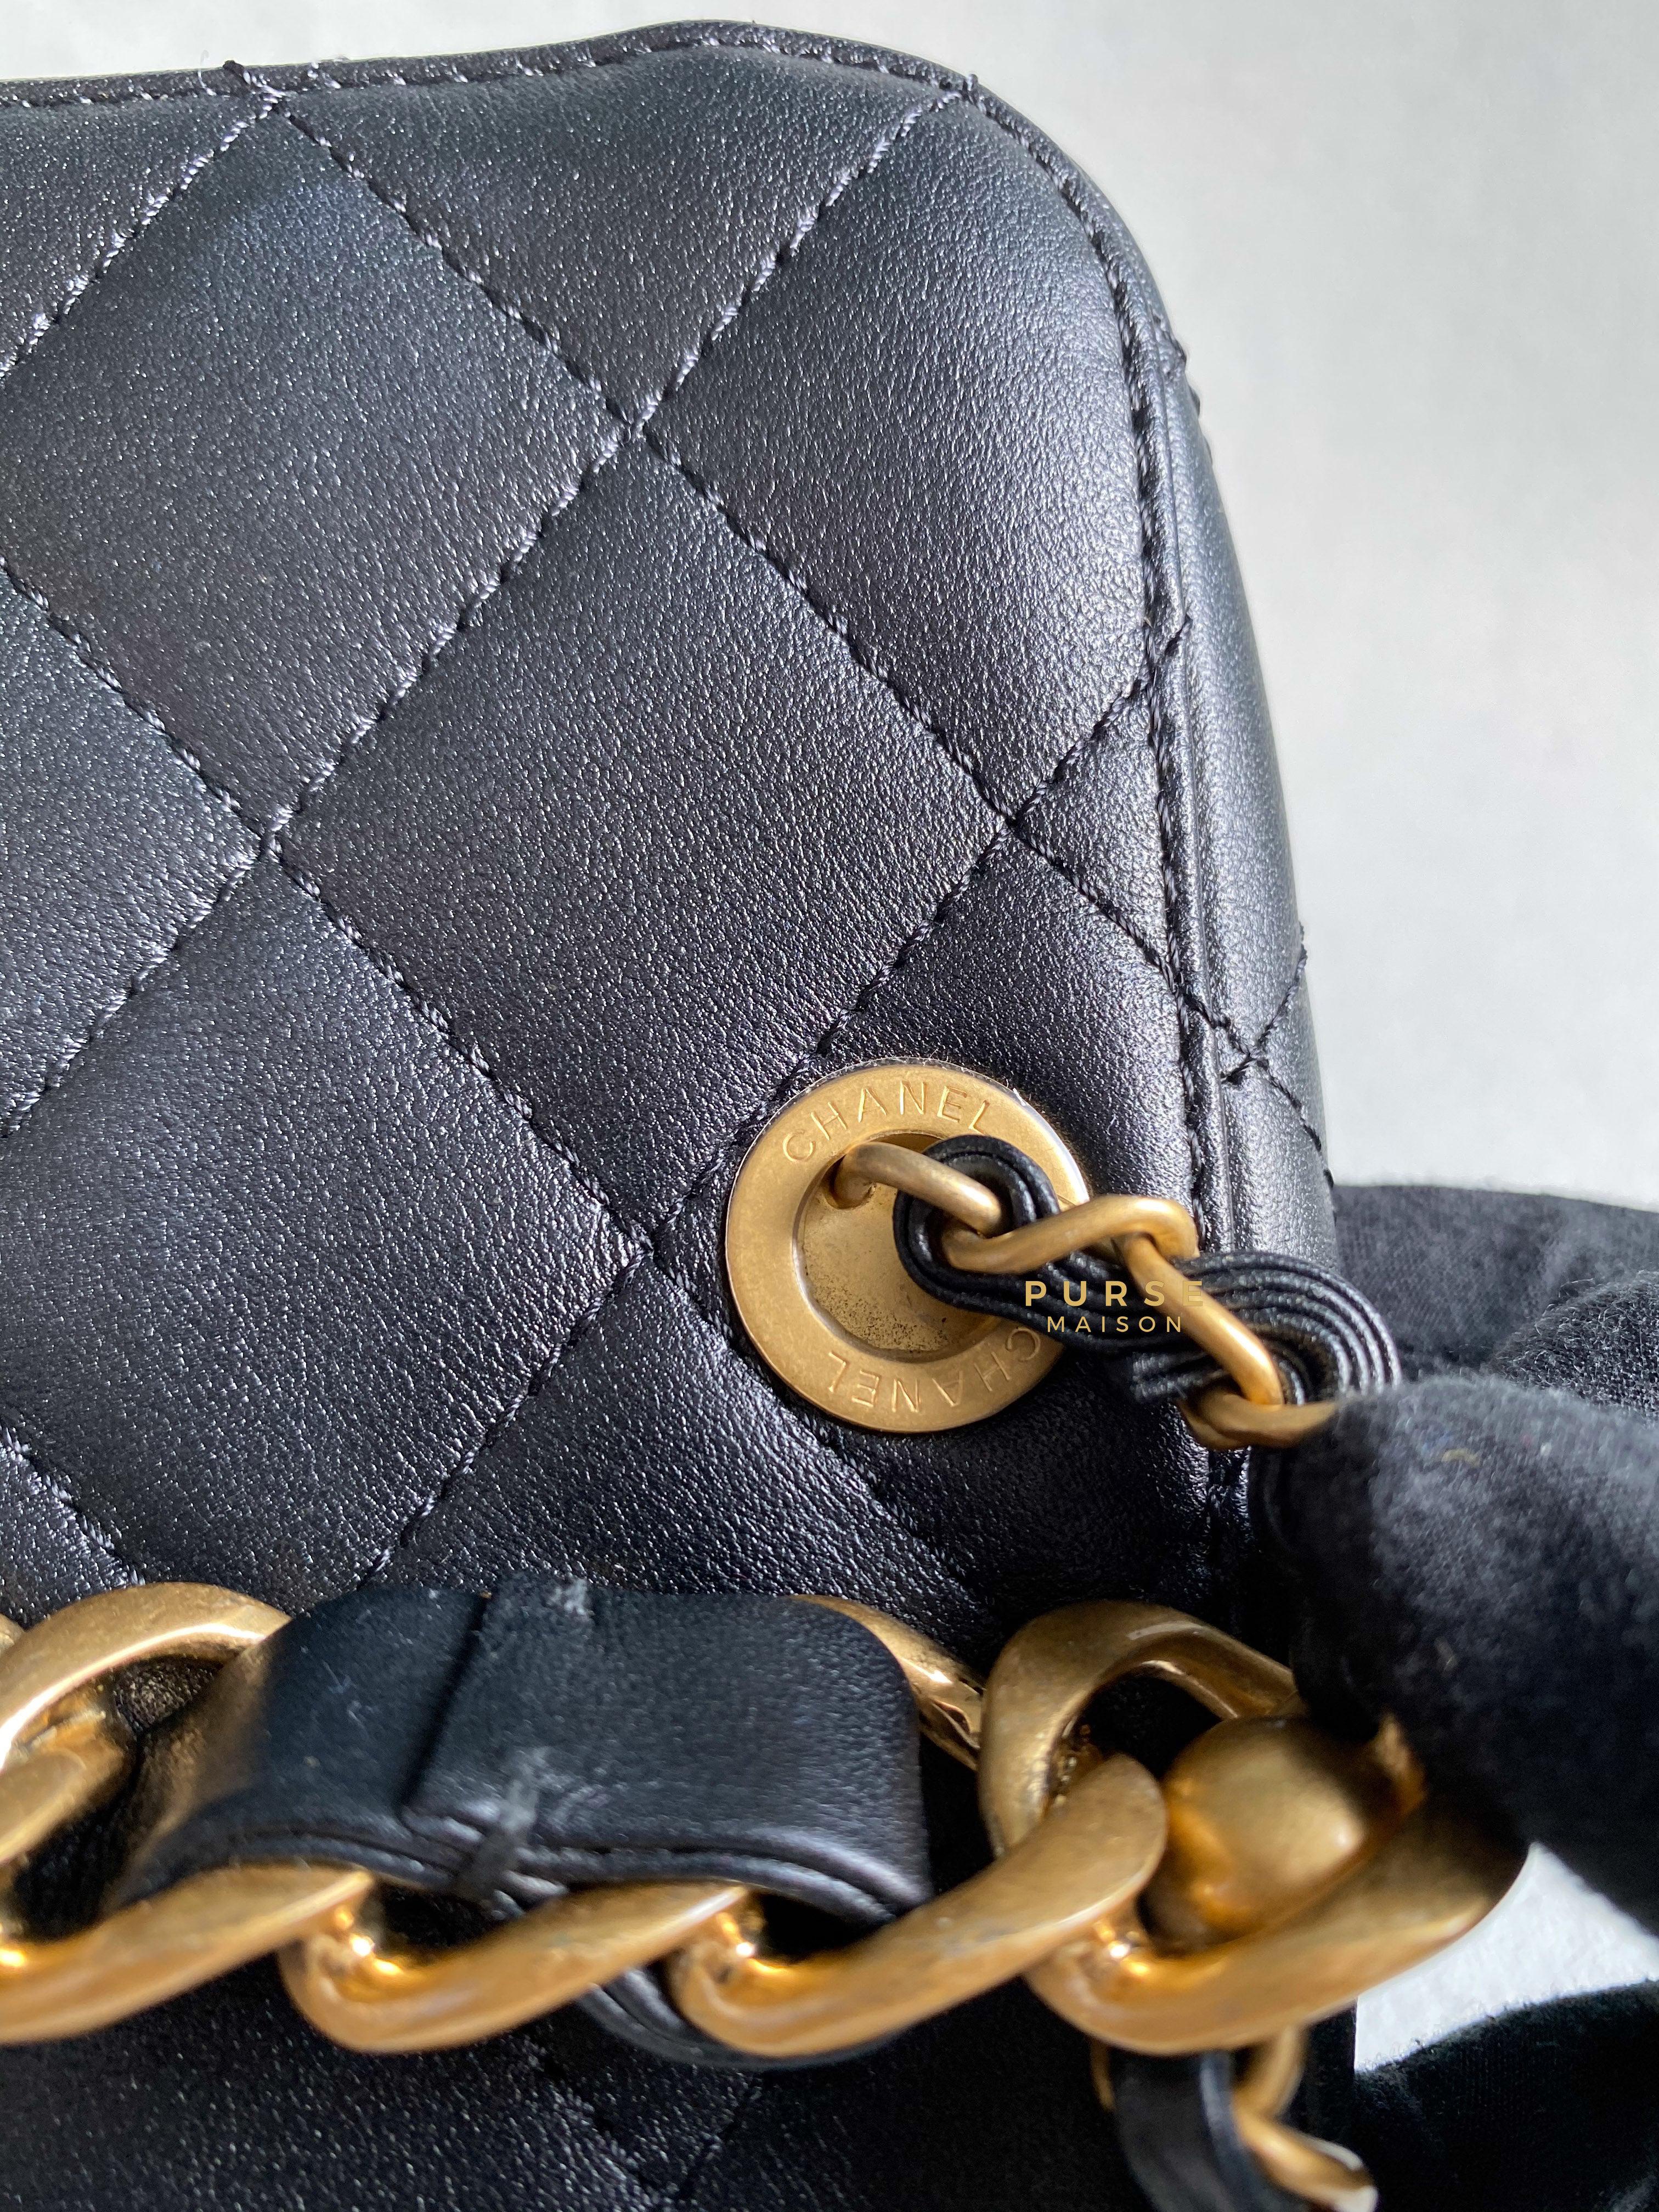 Chanel Vanity Case 22s Lambskin Leather in Aged Gold Hardware (Microchip) | Purse Maison Luxury Bags Shop